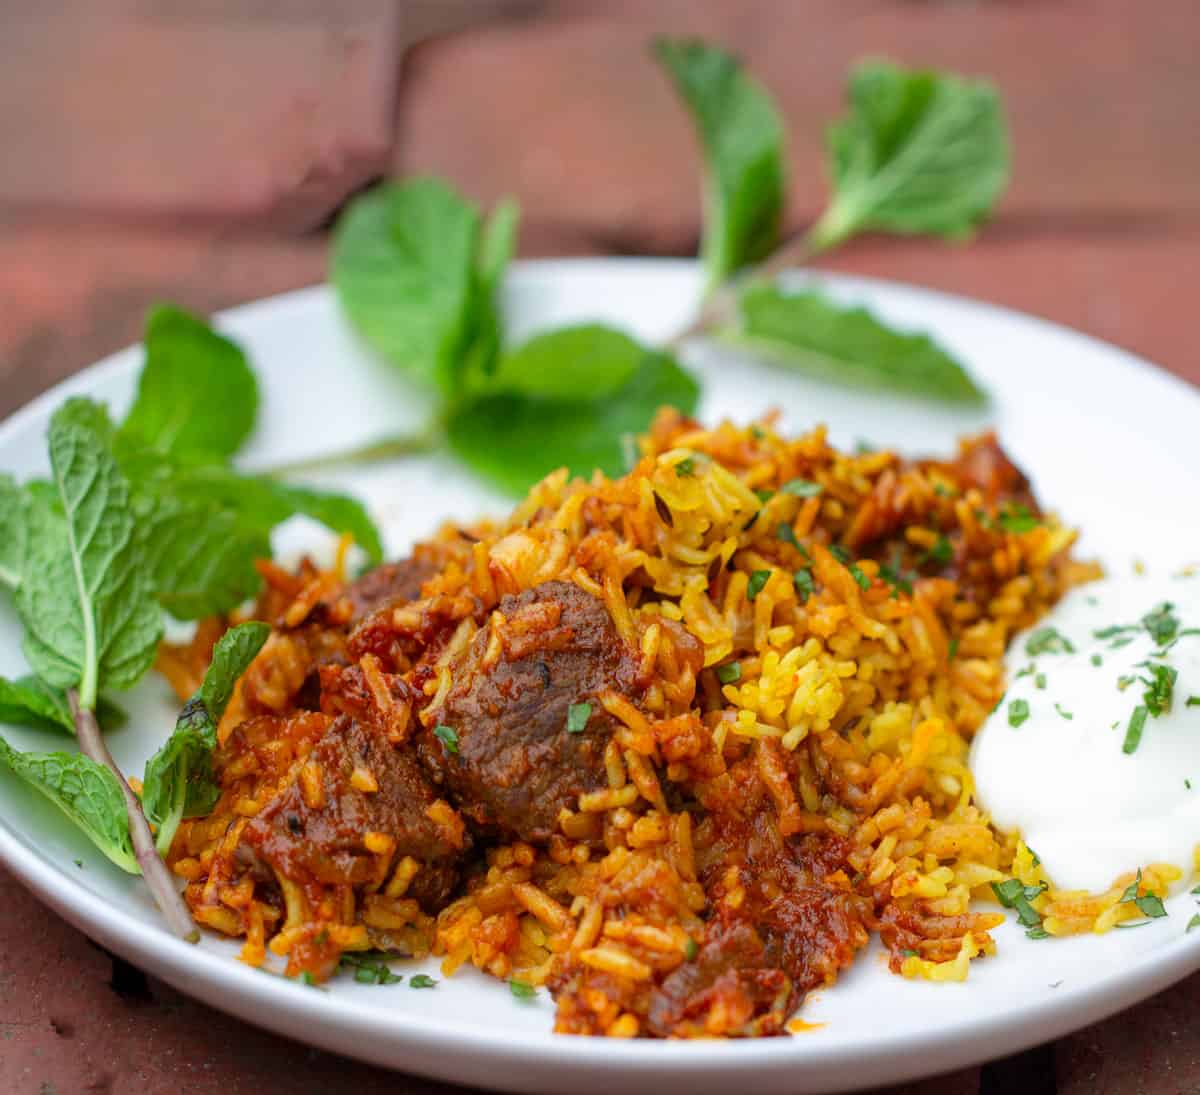 plate with a serving of lamb biryani and a very long windy sprig of mint. A small blob of yogurt raita on the side.